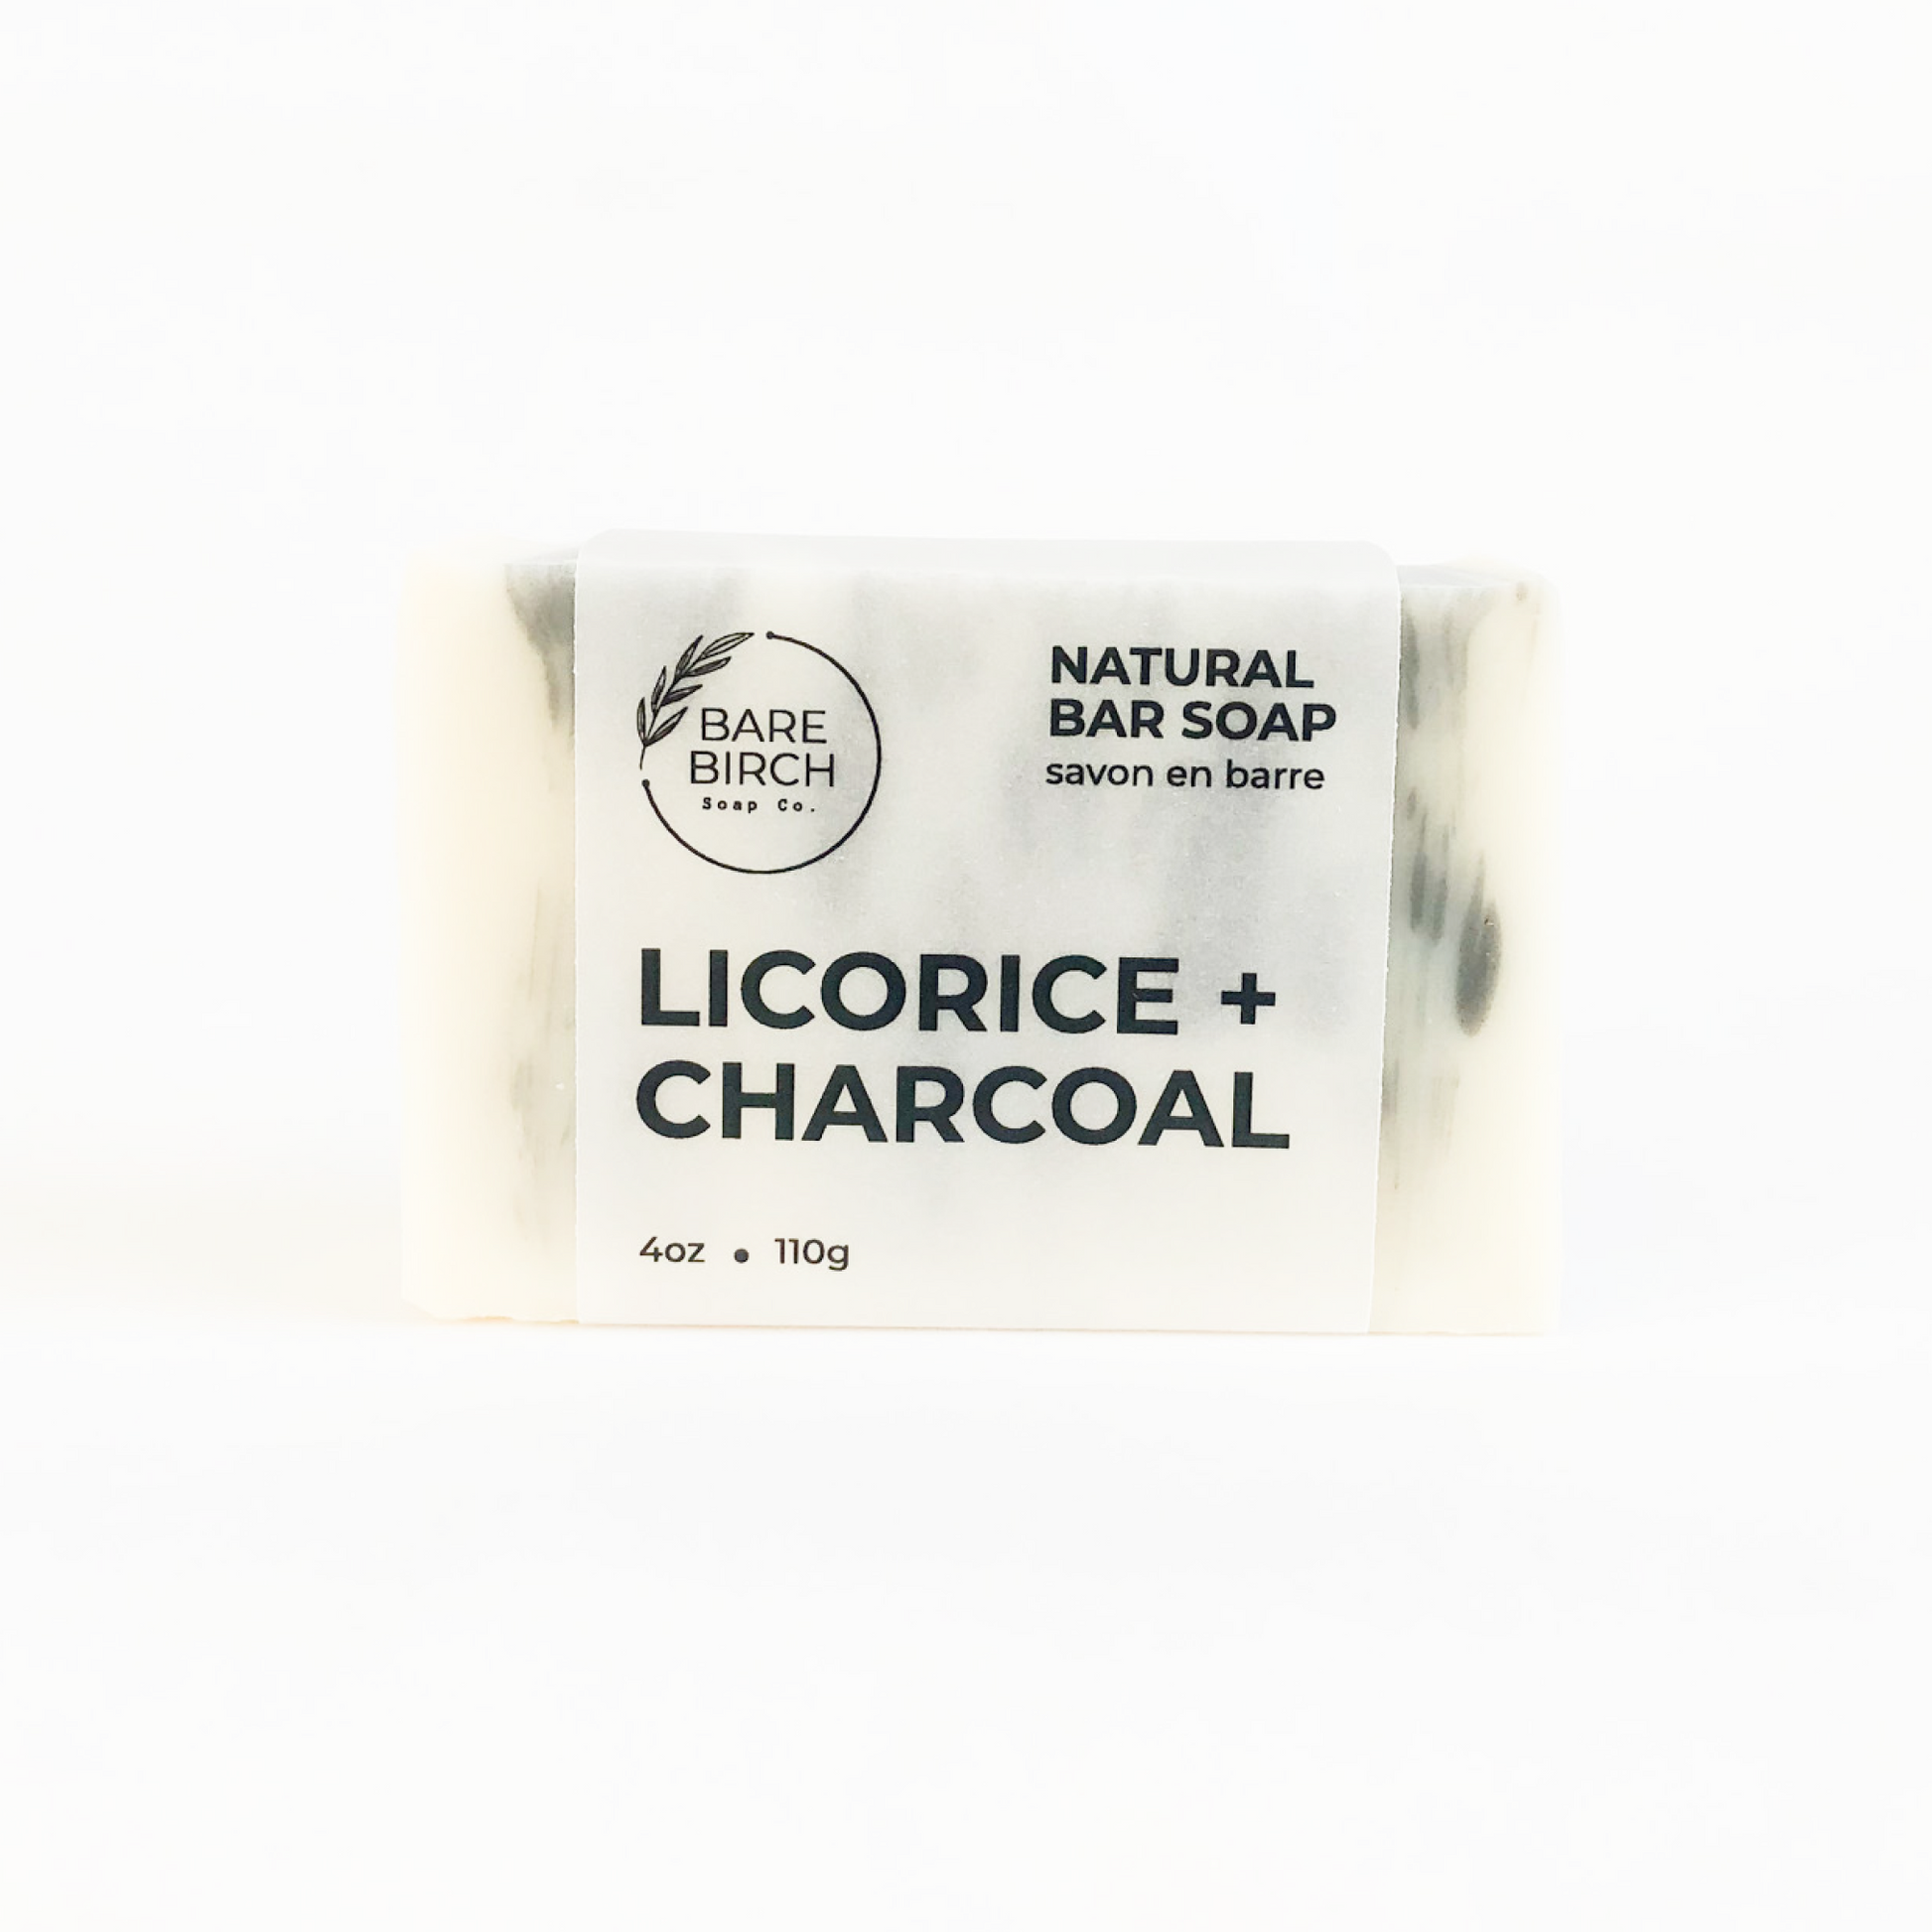 Licorice + Charcoal Natural Soap